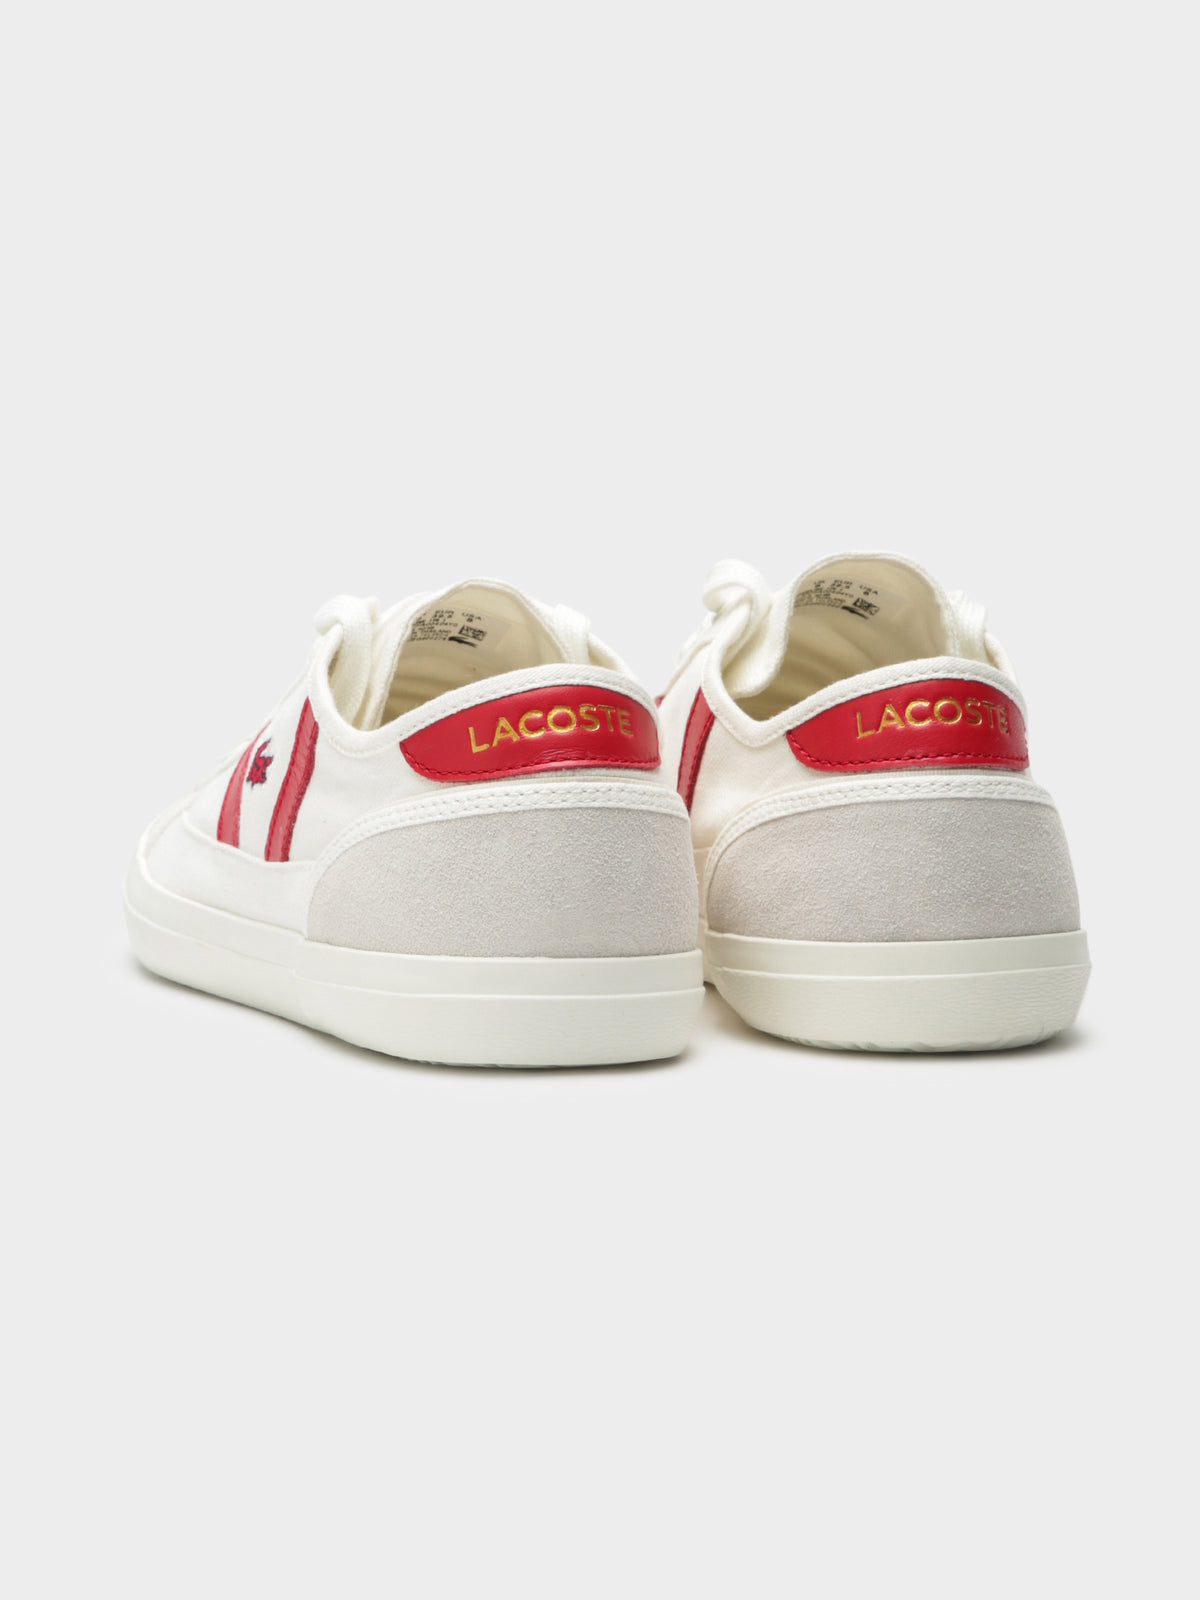 Womens Sideline 119 1 CFA Sneakers in Off White &amp; Red